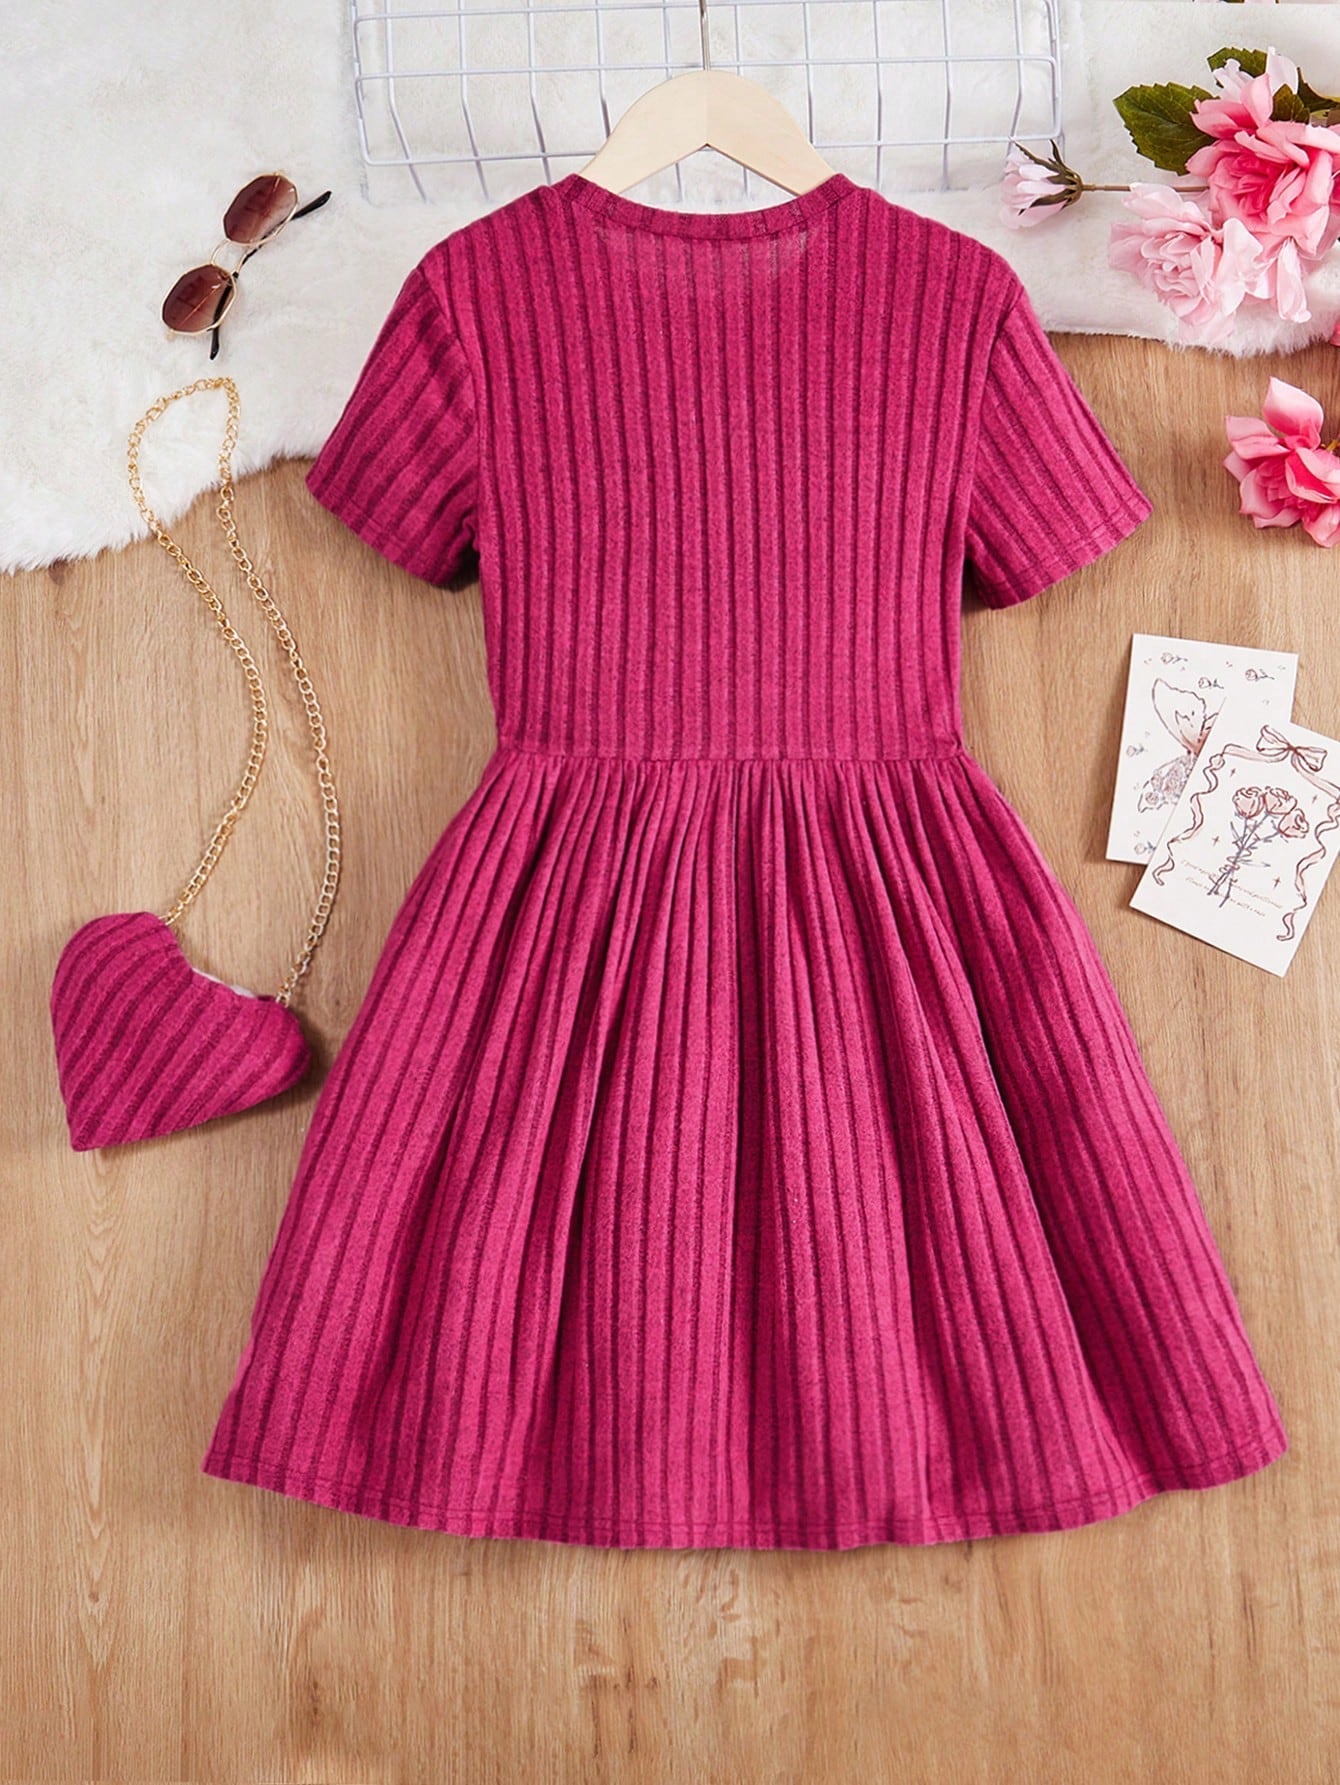 Tween Girl's Knitted A-Line Dress with Heart Bag - Casual, Rib-Knit, Slim Fit, Pleated Hem